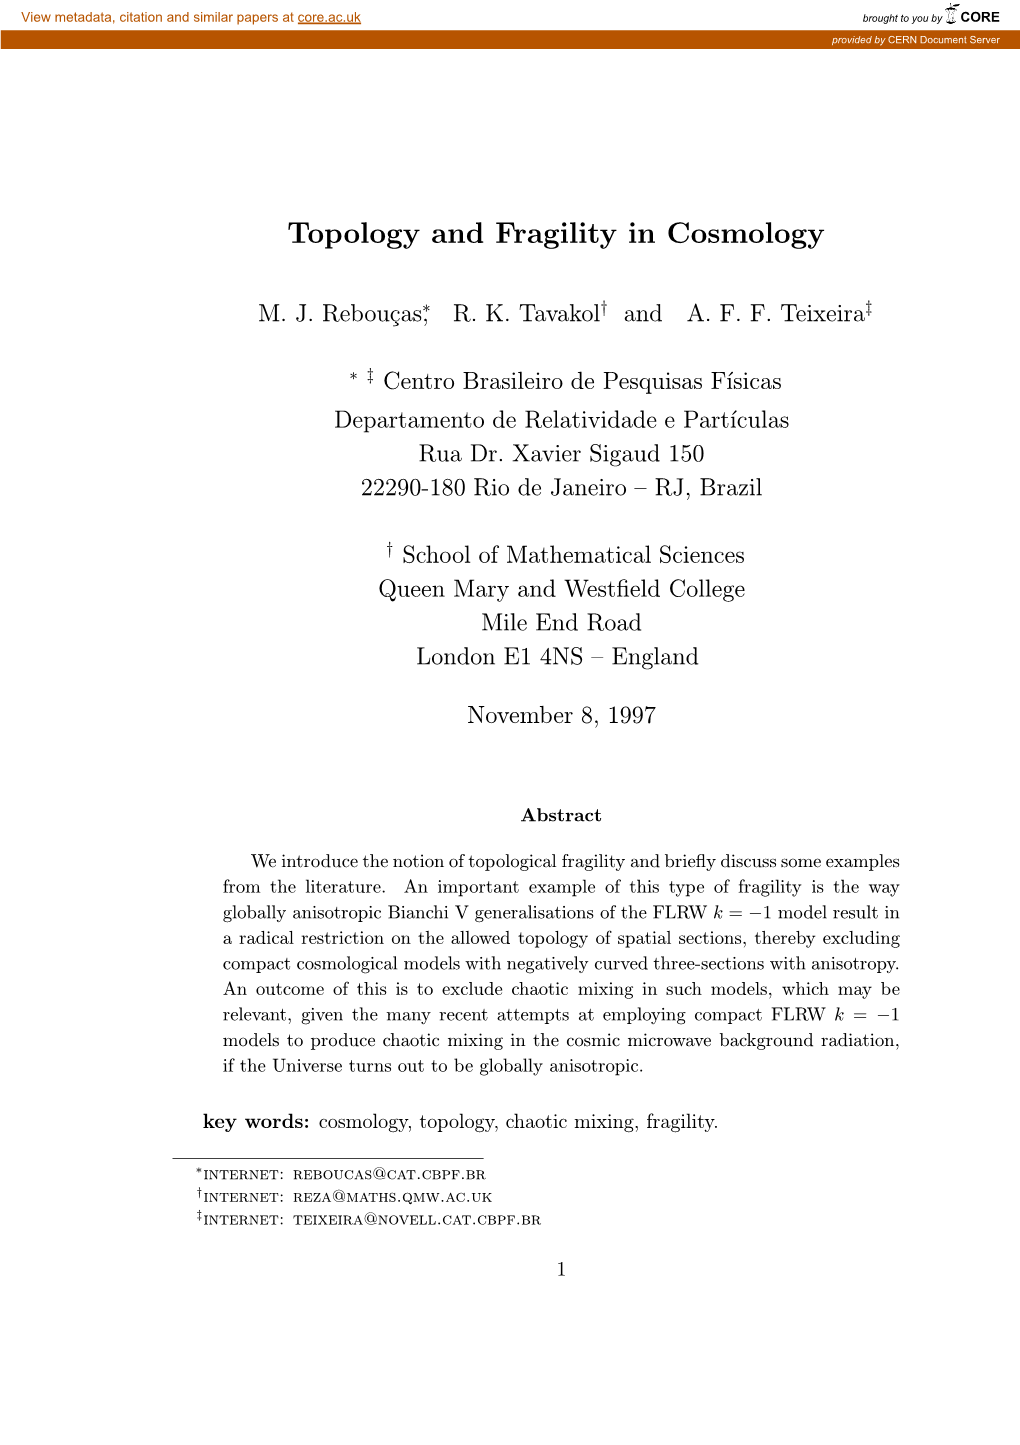 Topology and Fragility in Cosmology